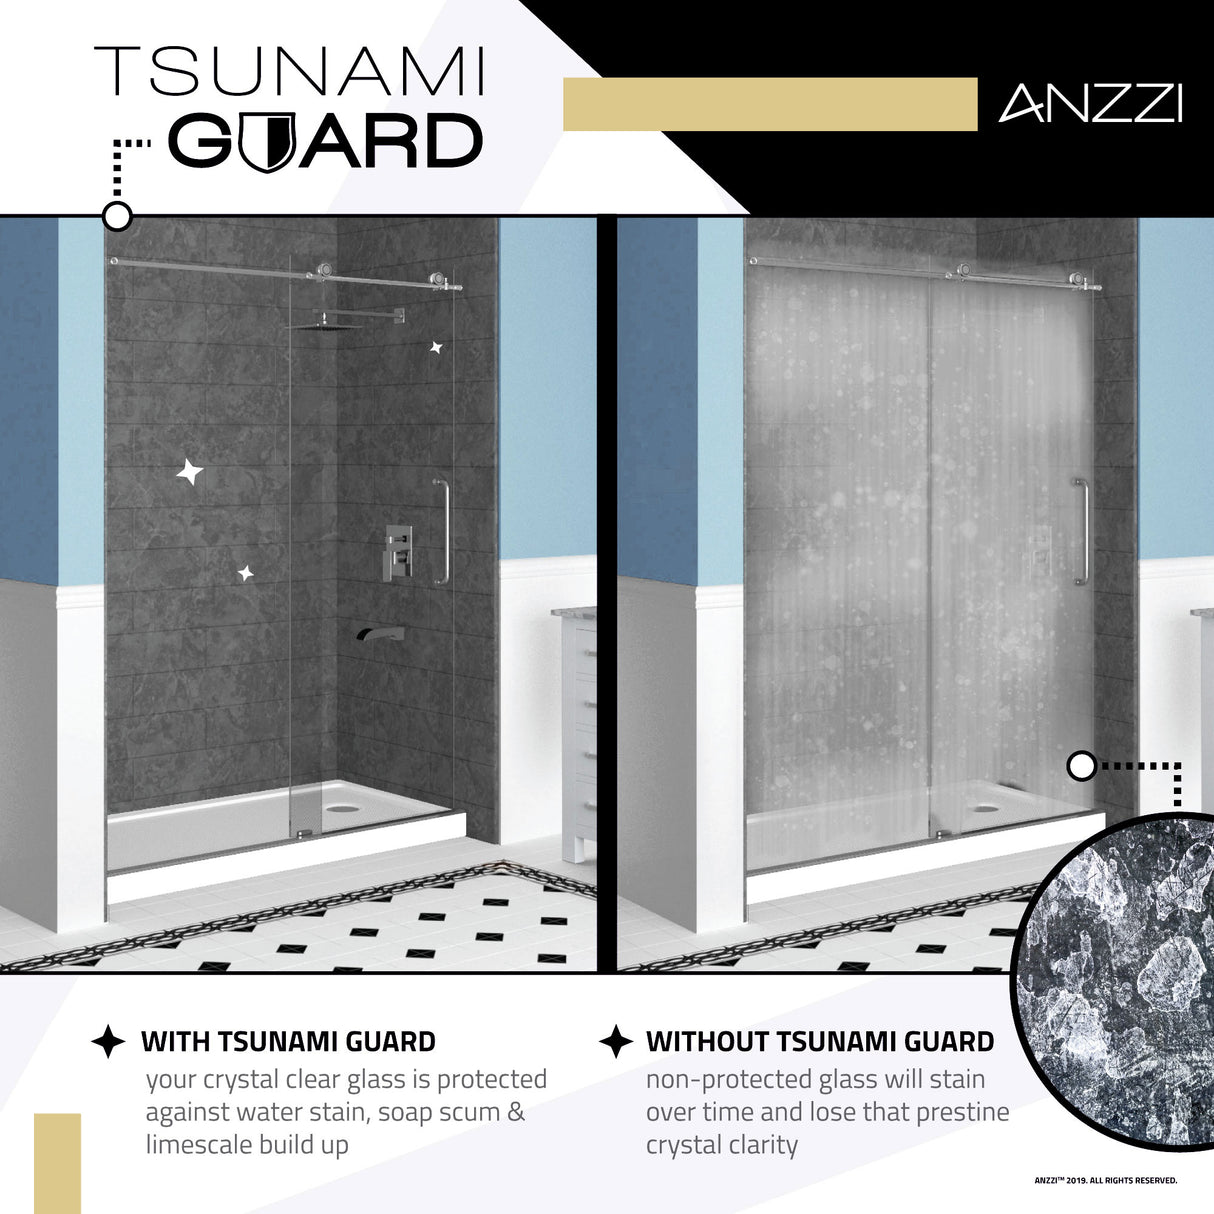 ANZZI SD-AZ053-01CH-R 28 in. x 56 in. Frameless Tub Door with TSUNAMI GUARD in Polished Chrome